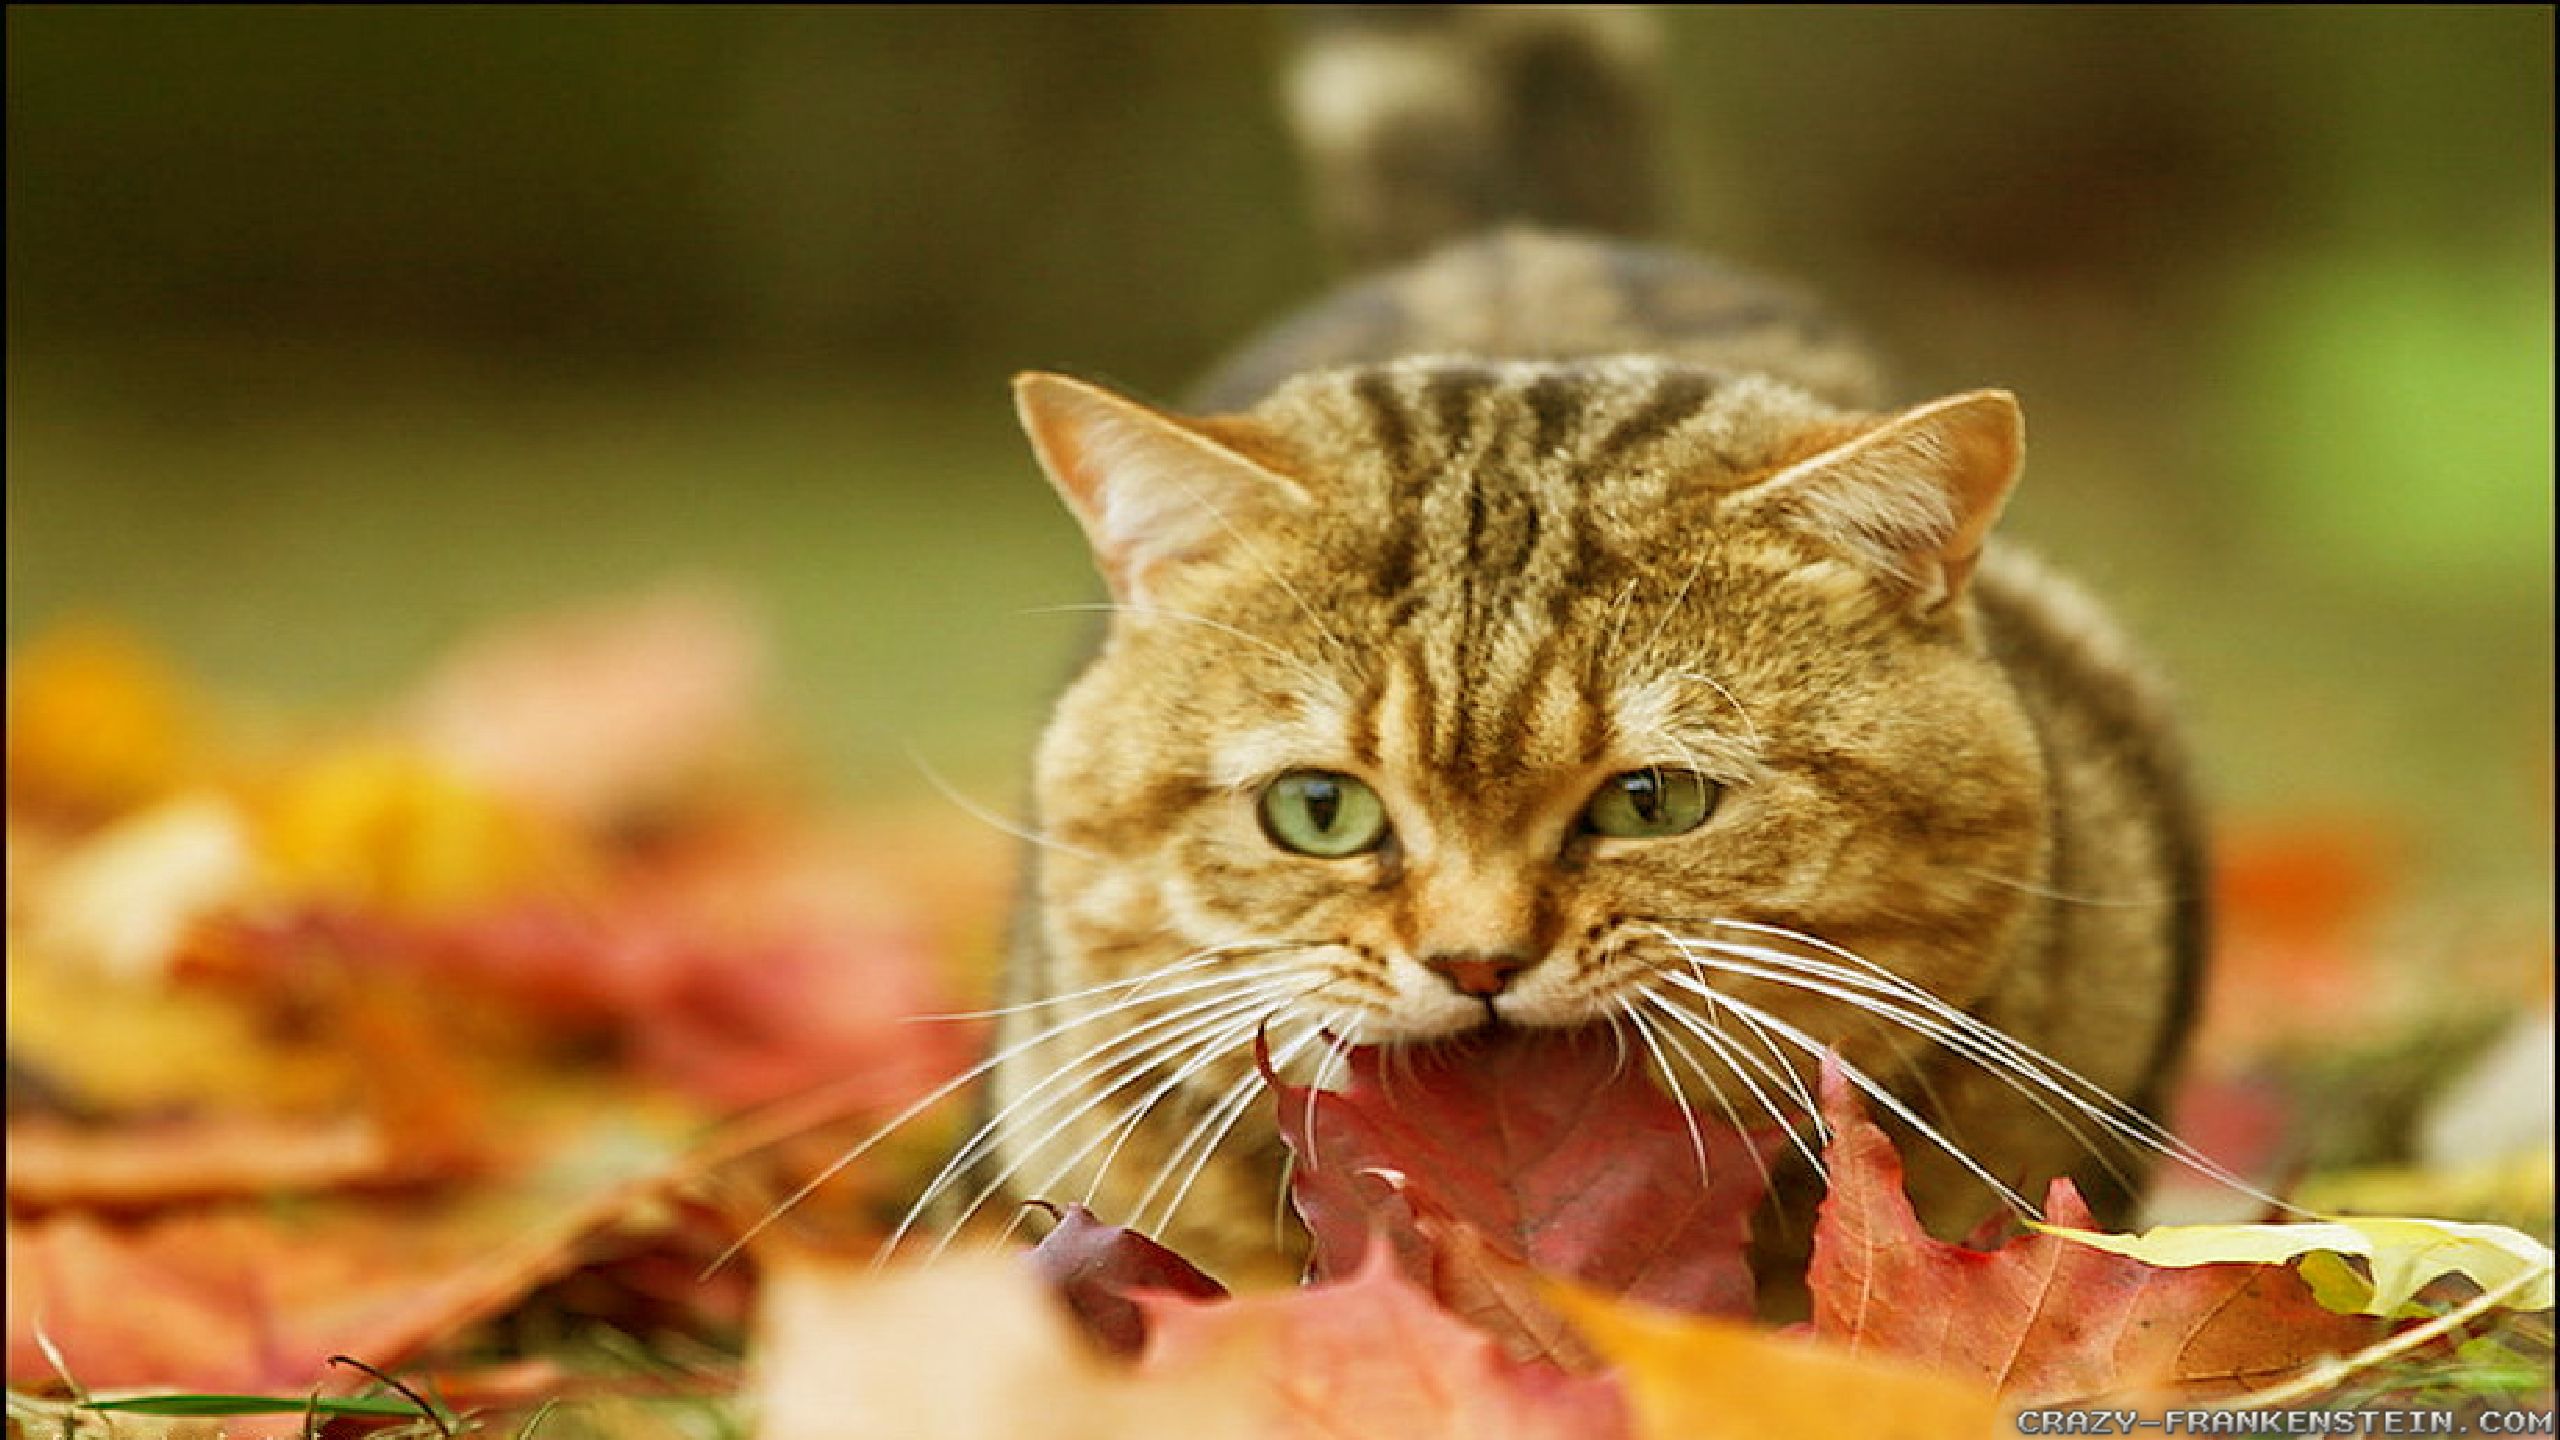 Collection of Autumn Cat Wallpaper on HDWallpapers